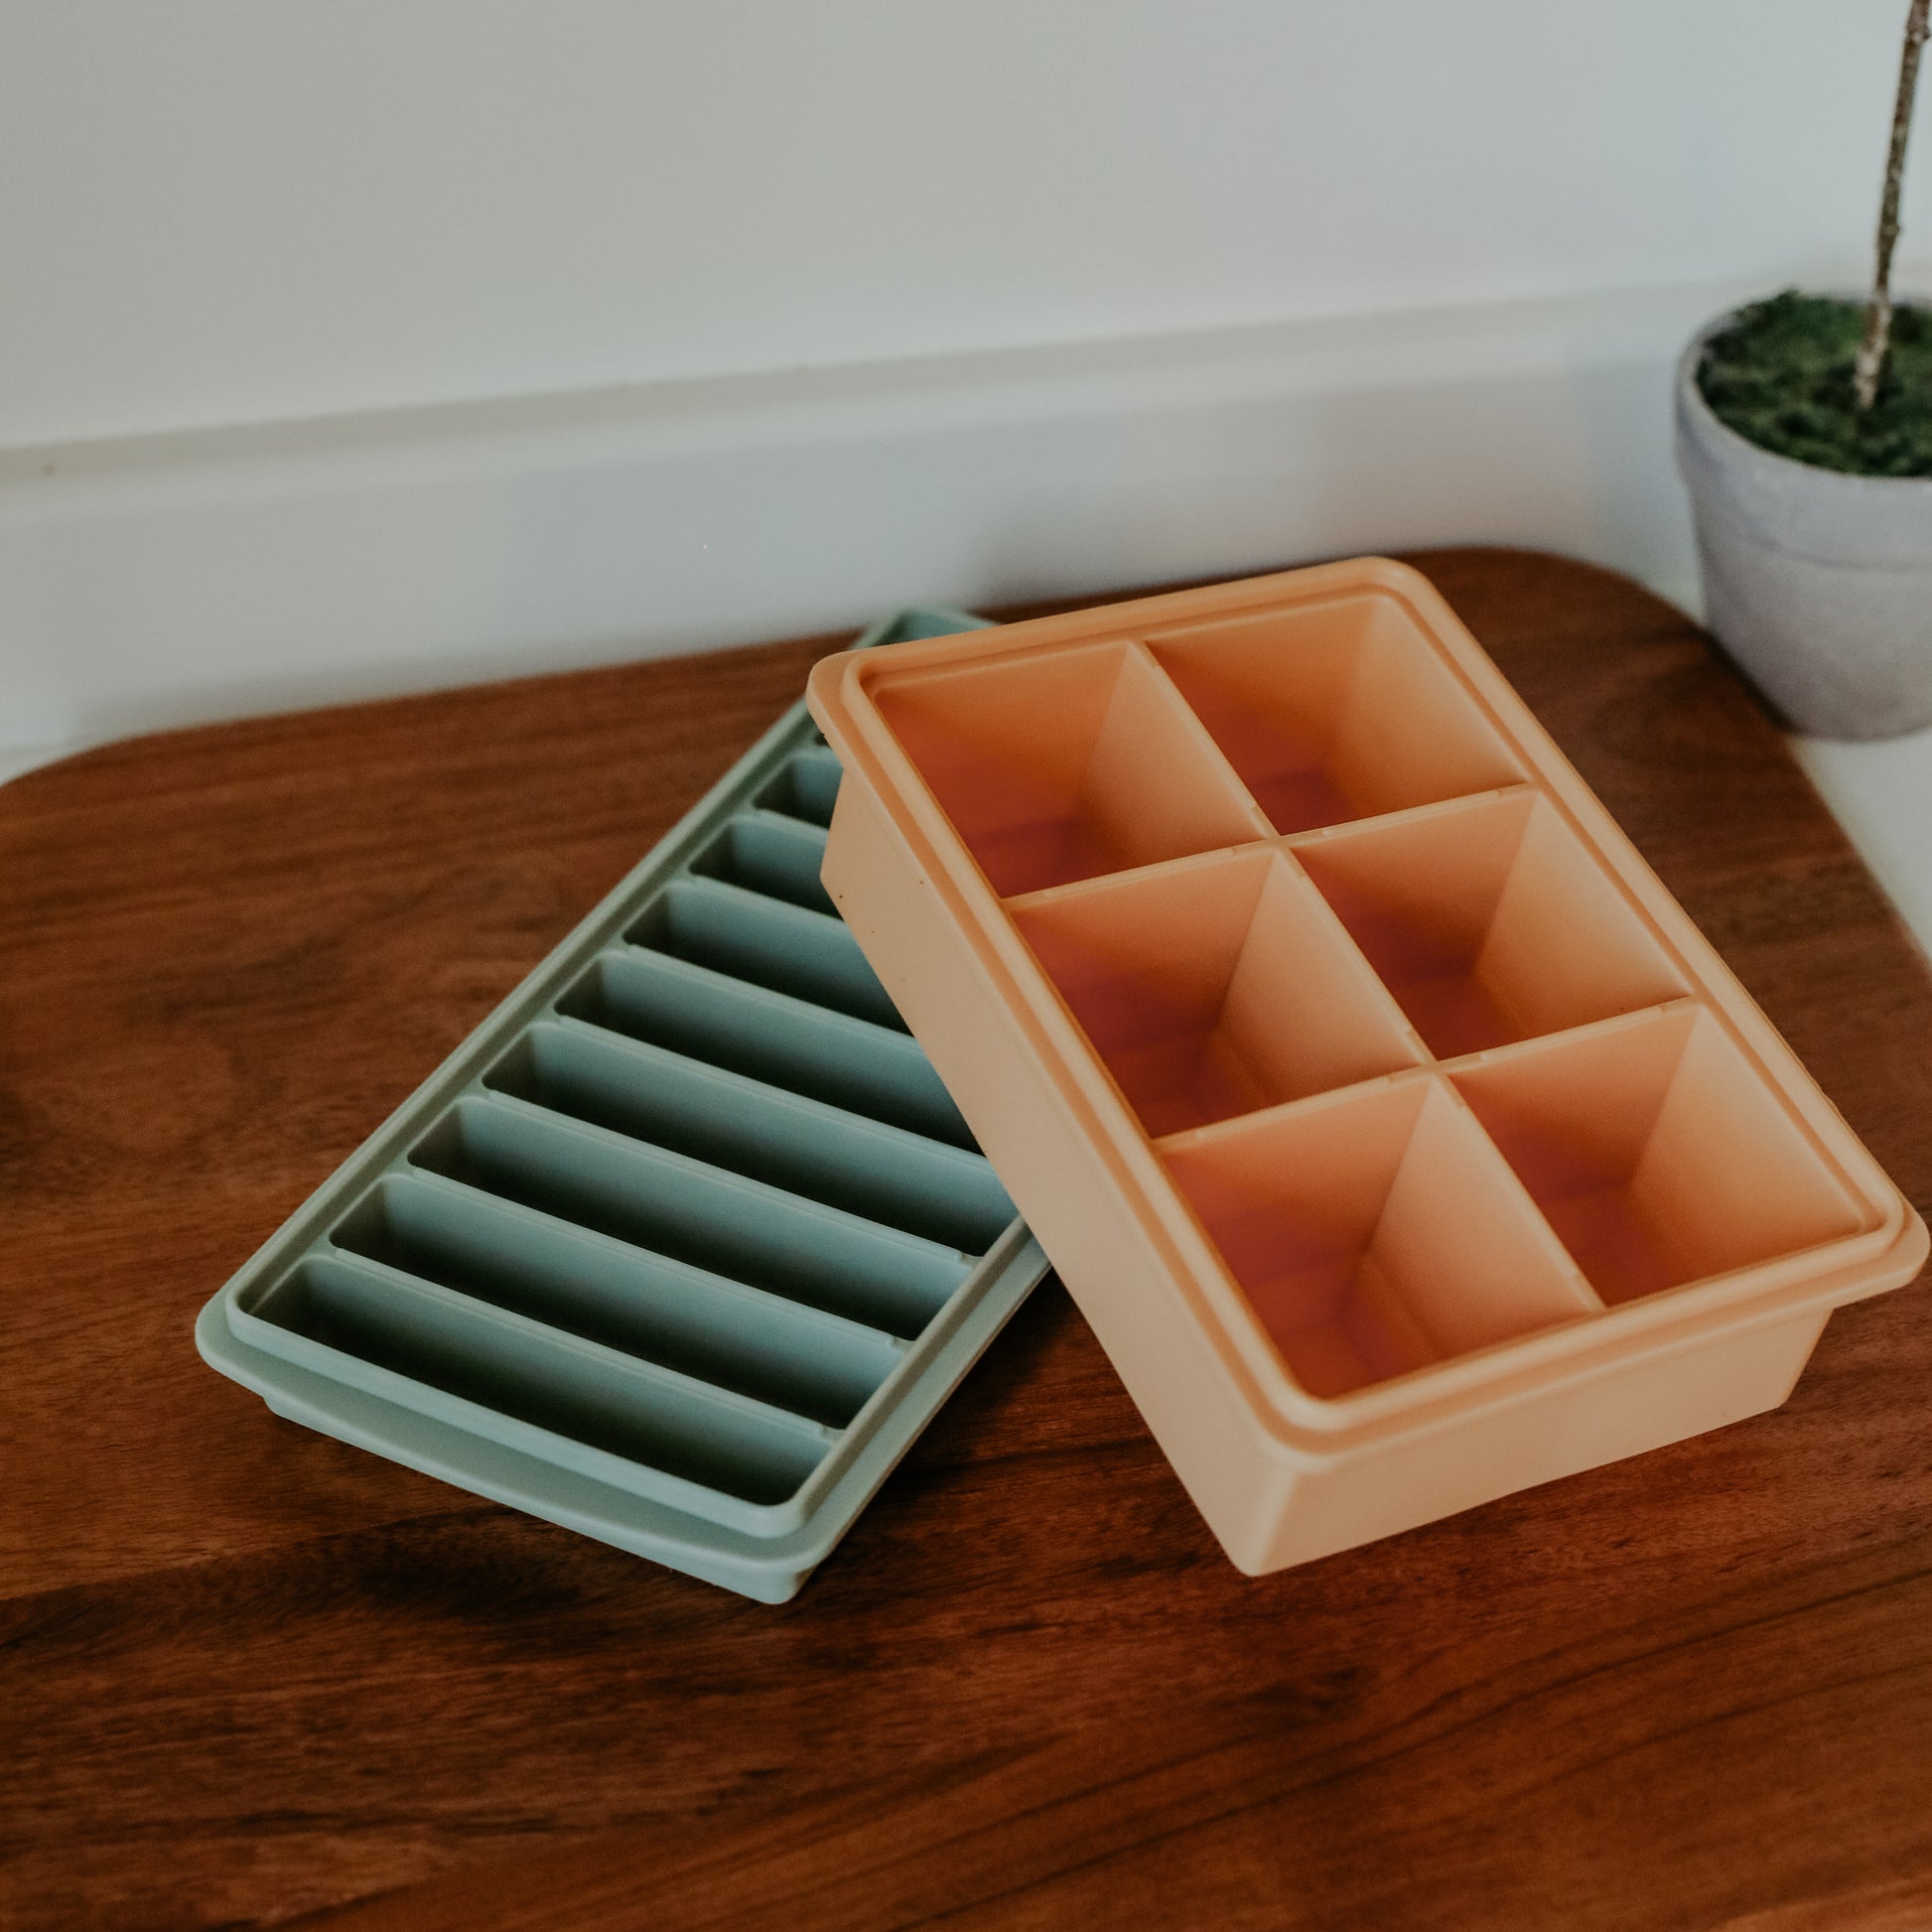 Good Citizen Silicone Iced Coffee Tray - Tall Cube